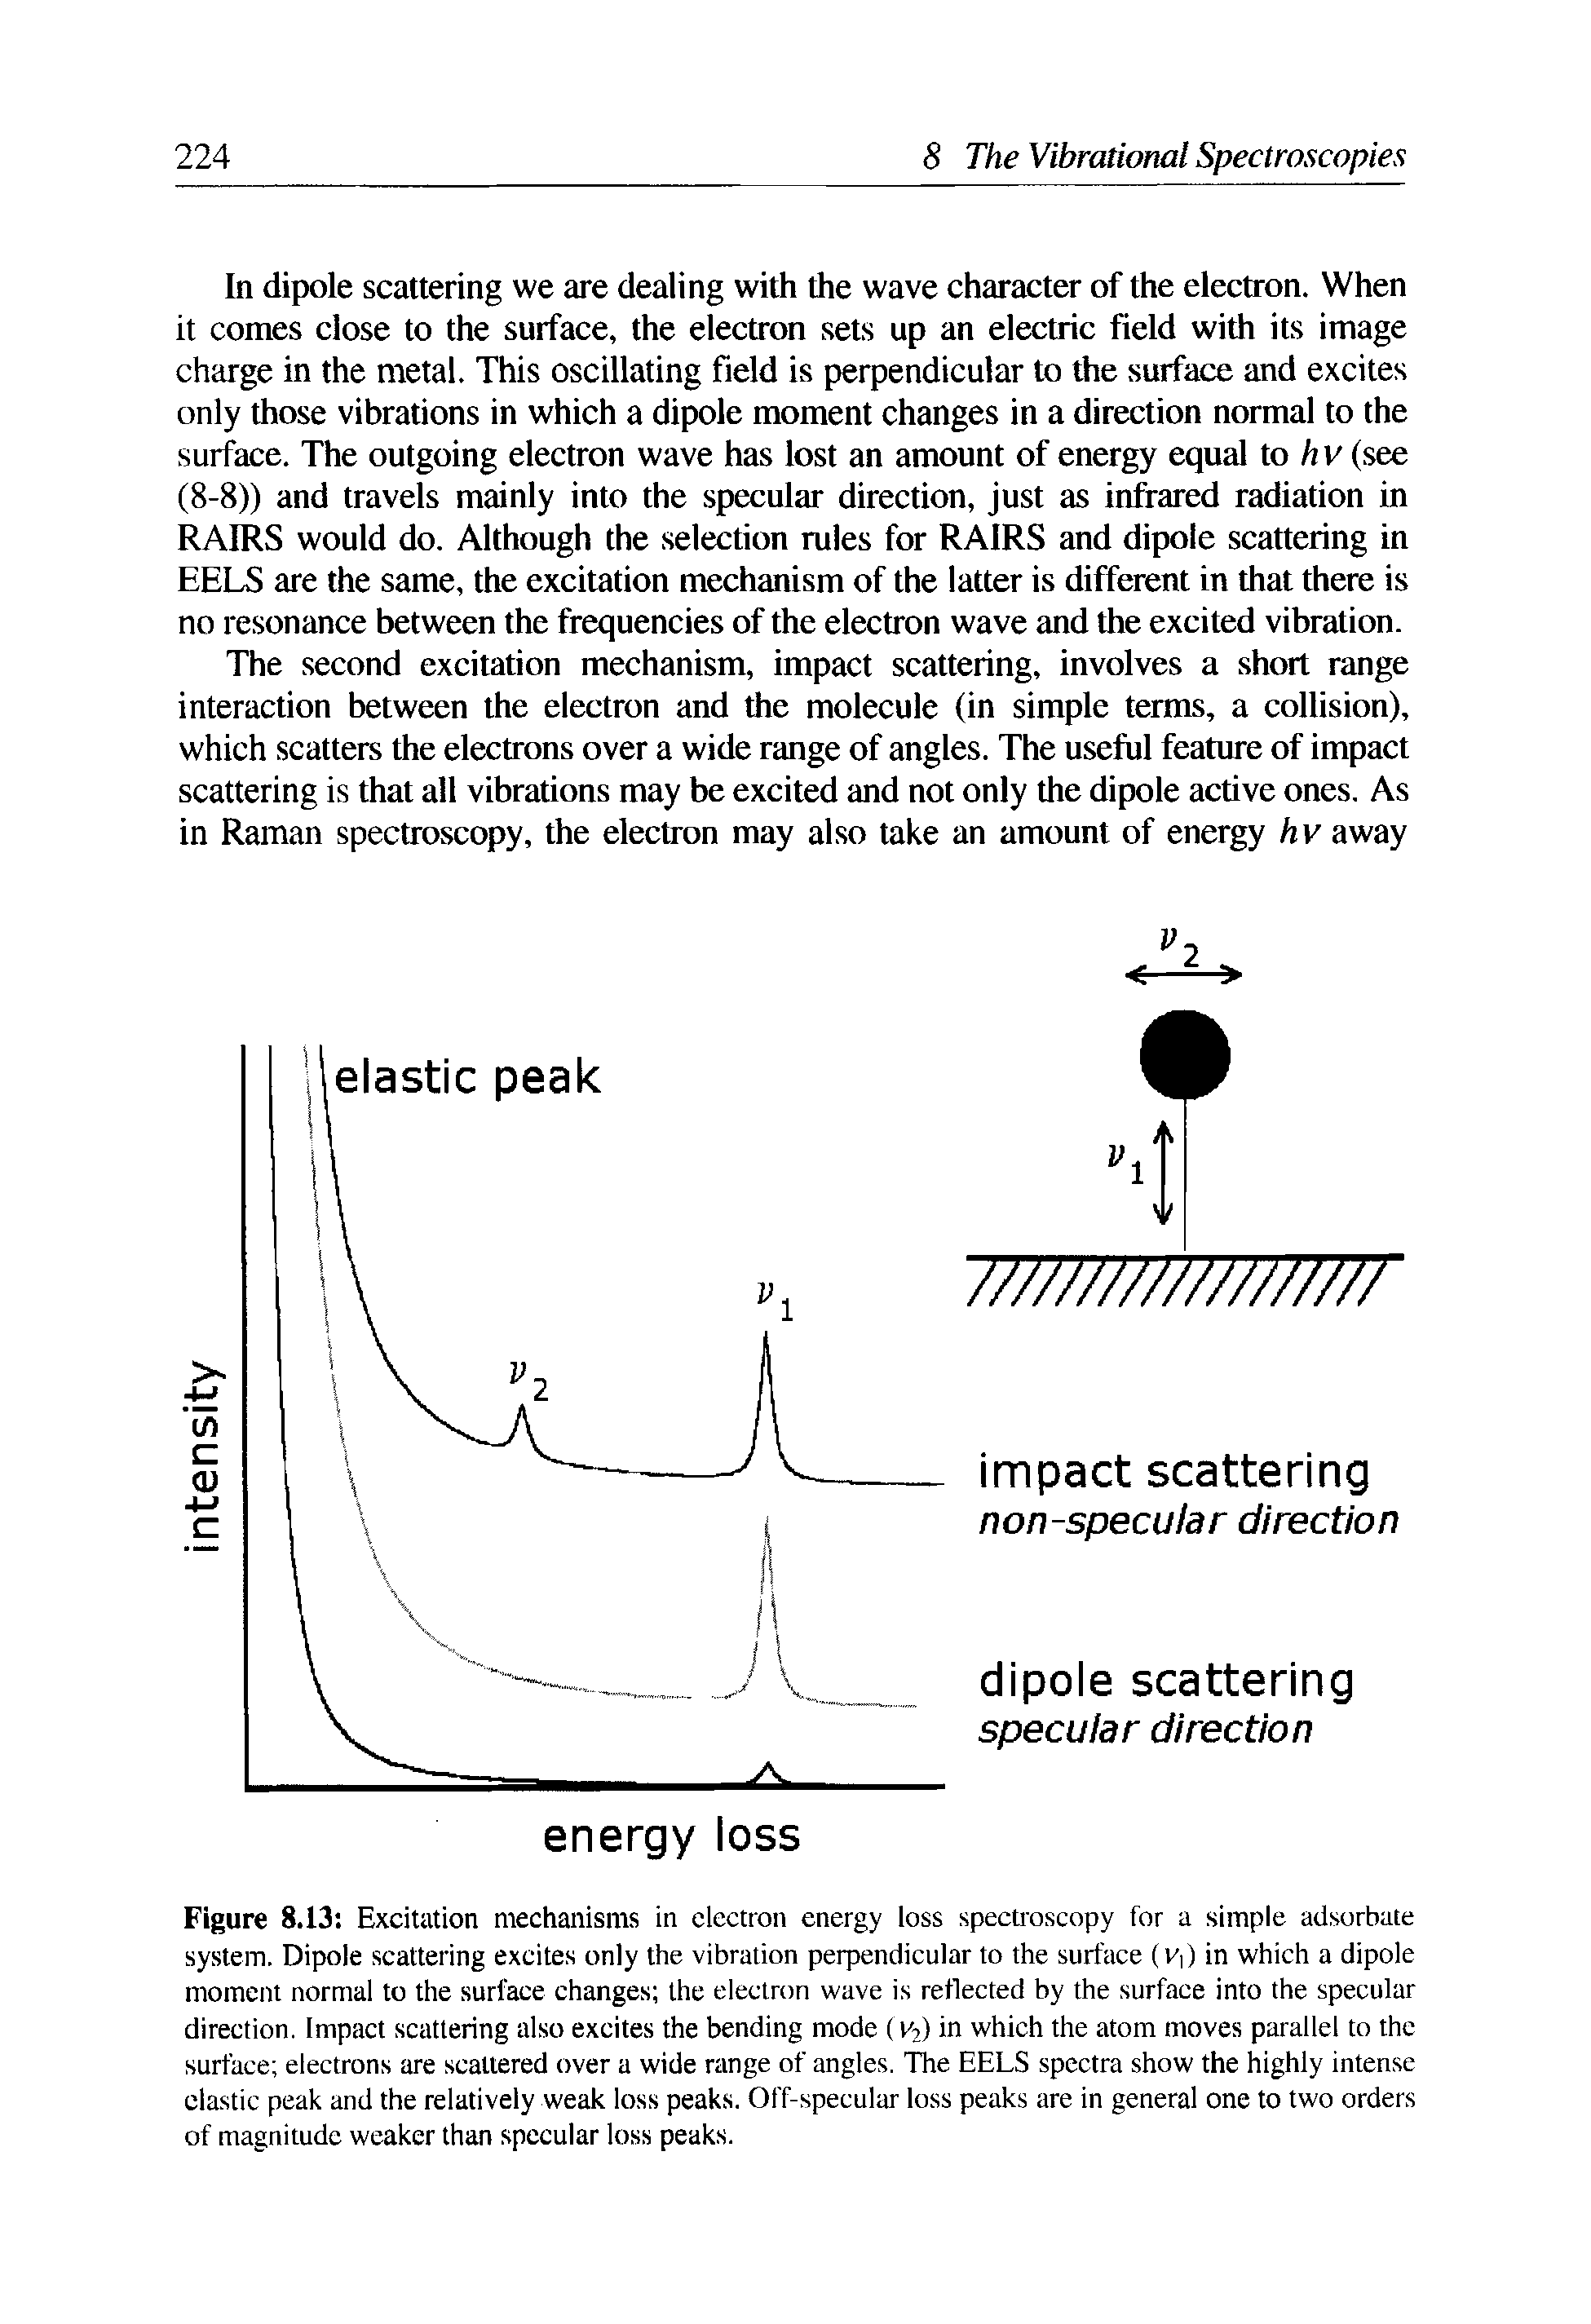 Figure 8.13 Excitation mechanisms in electron energy loss spectroscopy for a simple adsorbate system. Dipole scattering excites only the vibration perpendicular to the surface (v,) in which a dipole moment normal to the surface changes the electron wave is reflected by the surface into the specular direction. Impact scattering also excites the bending mode (v ) in which the atom moves parallel to the surface electrons are scattered over a wide range of angles. The EELS spectra show the highly intense elastic peak and the relatively weak loss peaks. Off-specular loss peaks are in general one to two orders of magnitude weaker than specular loss peaks.